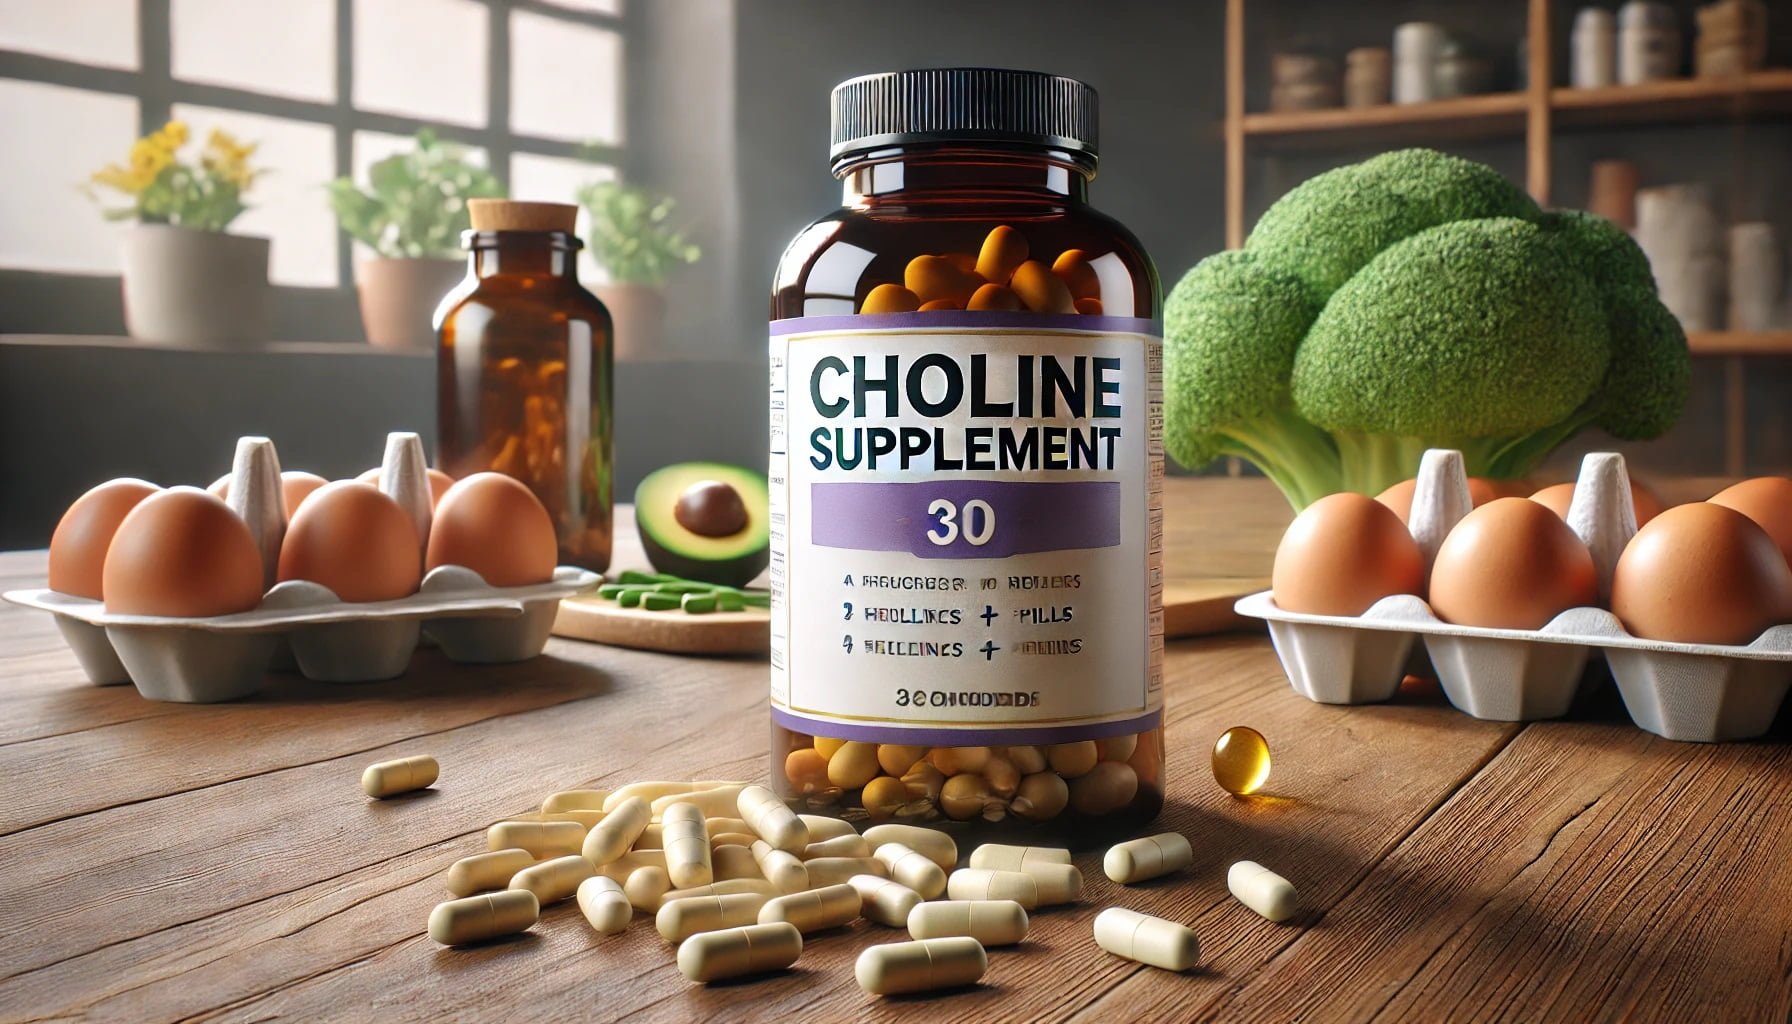 choline supplement uses, dosage and side effects